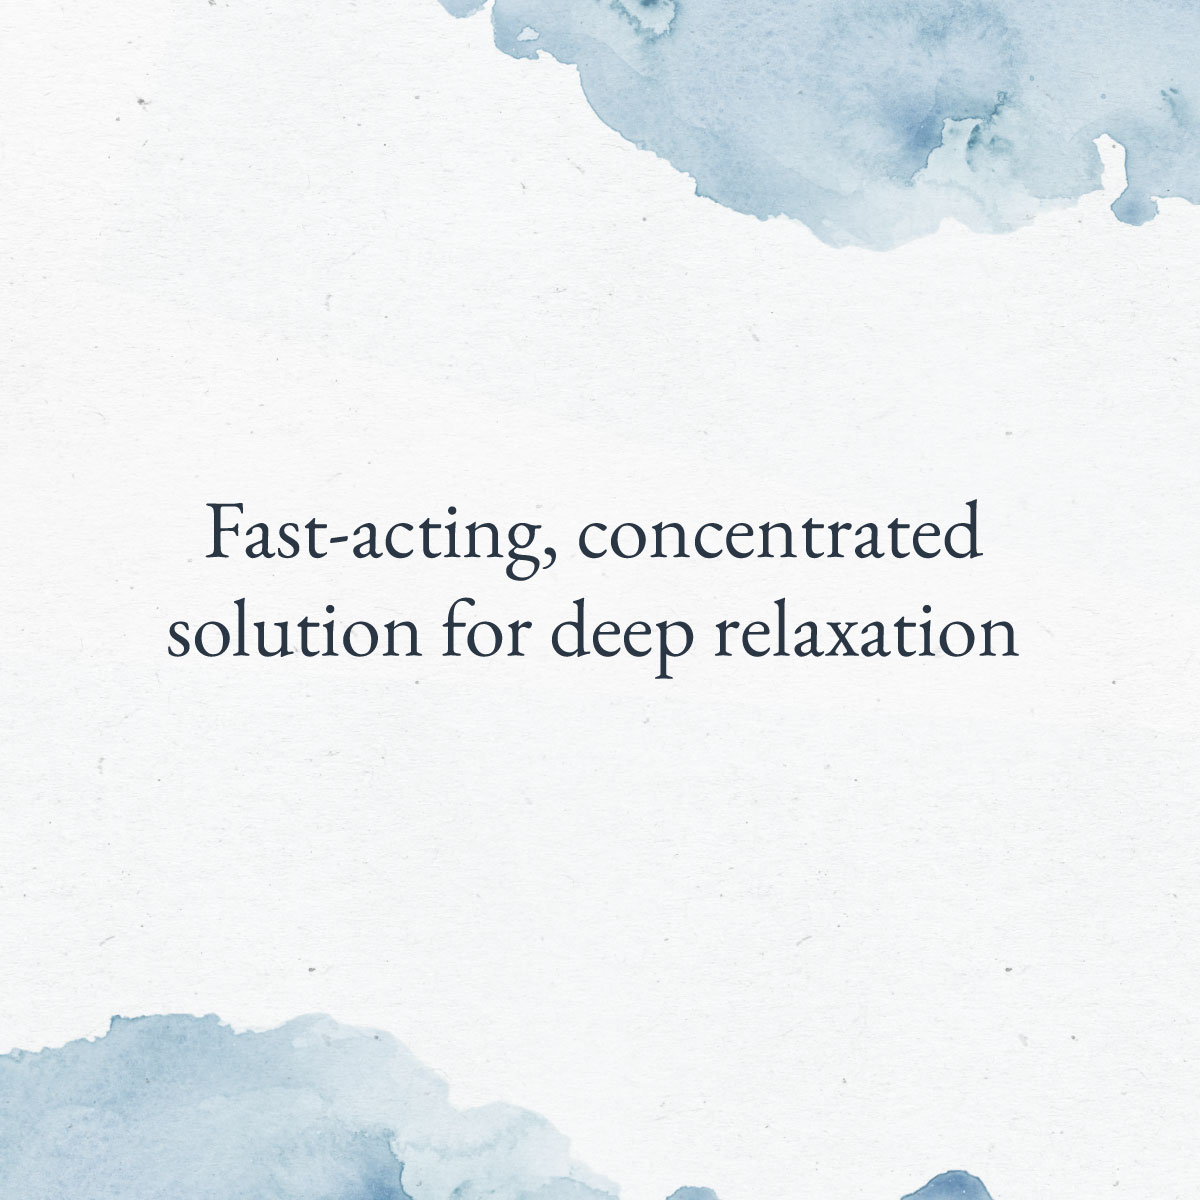 Fast-acting, concentrated solution for deep relaxation